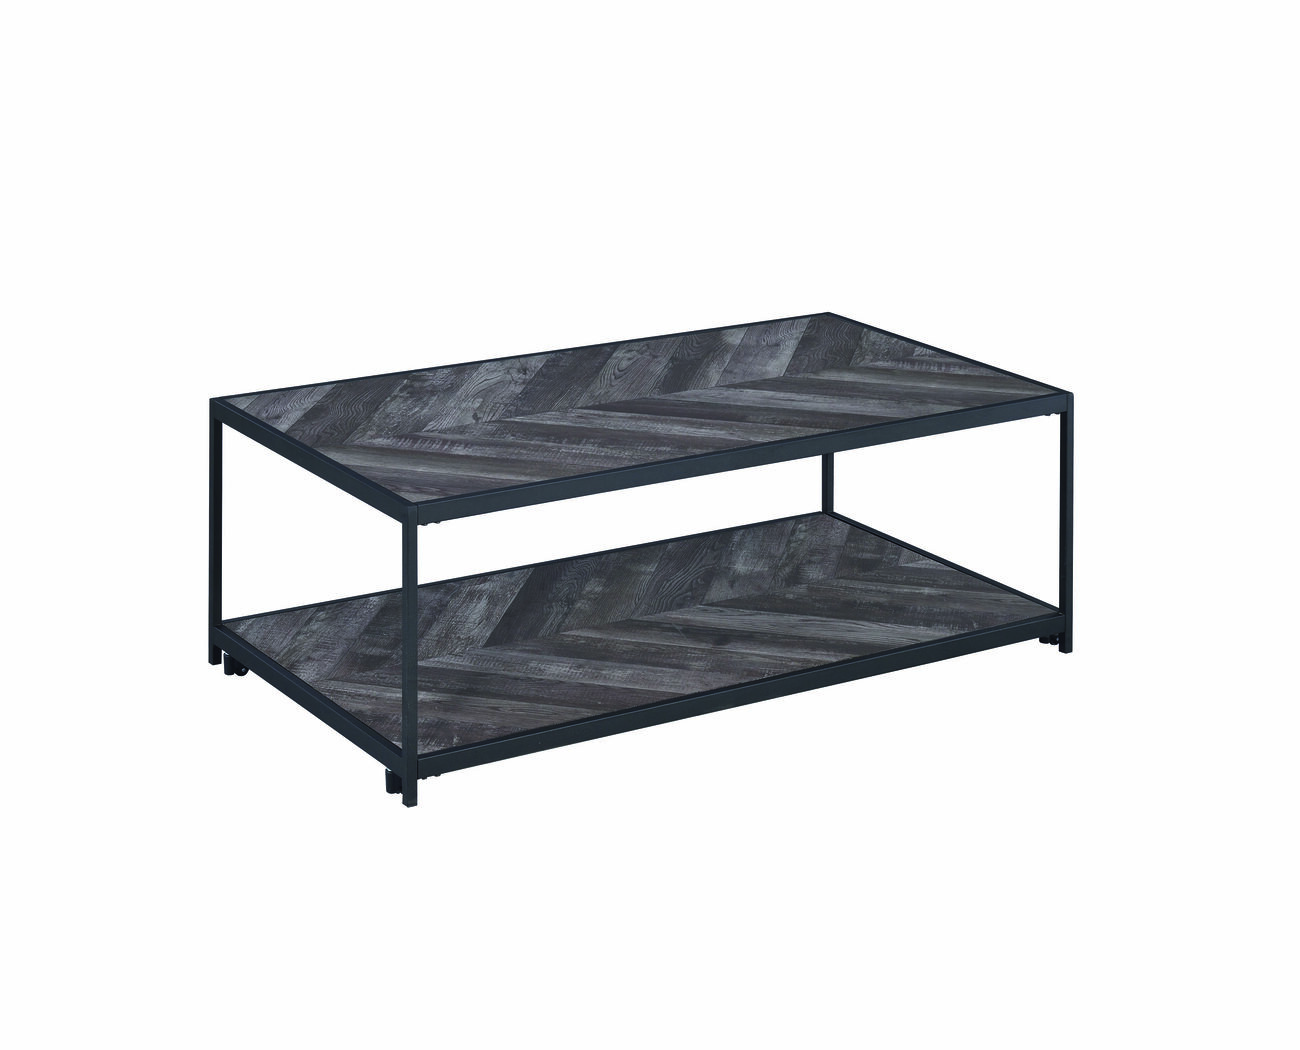 Metal Frame Coffee Table with Wooden Top and Bottom Shelf, Black and Brown